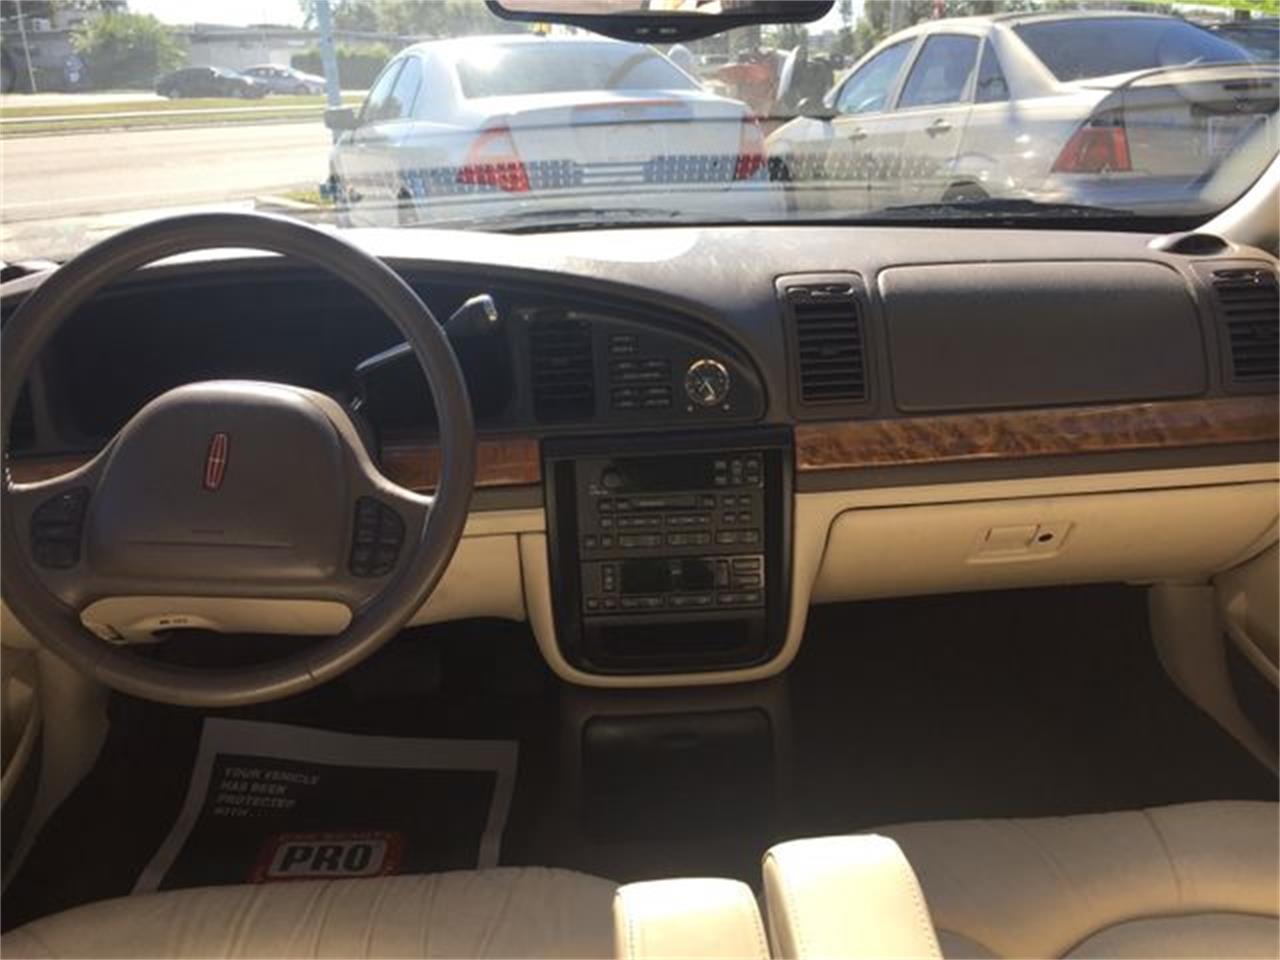 1998 lincoln continental for sale classiccars com cc 1046612 1998 lincoln continental for sale